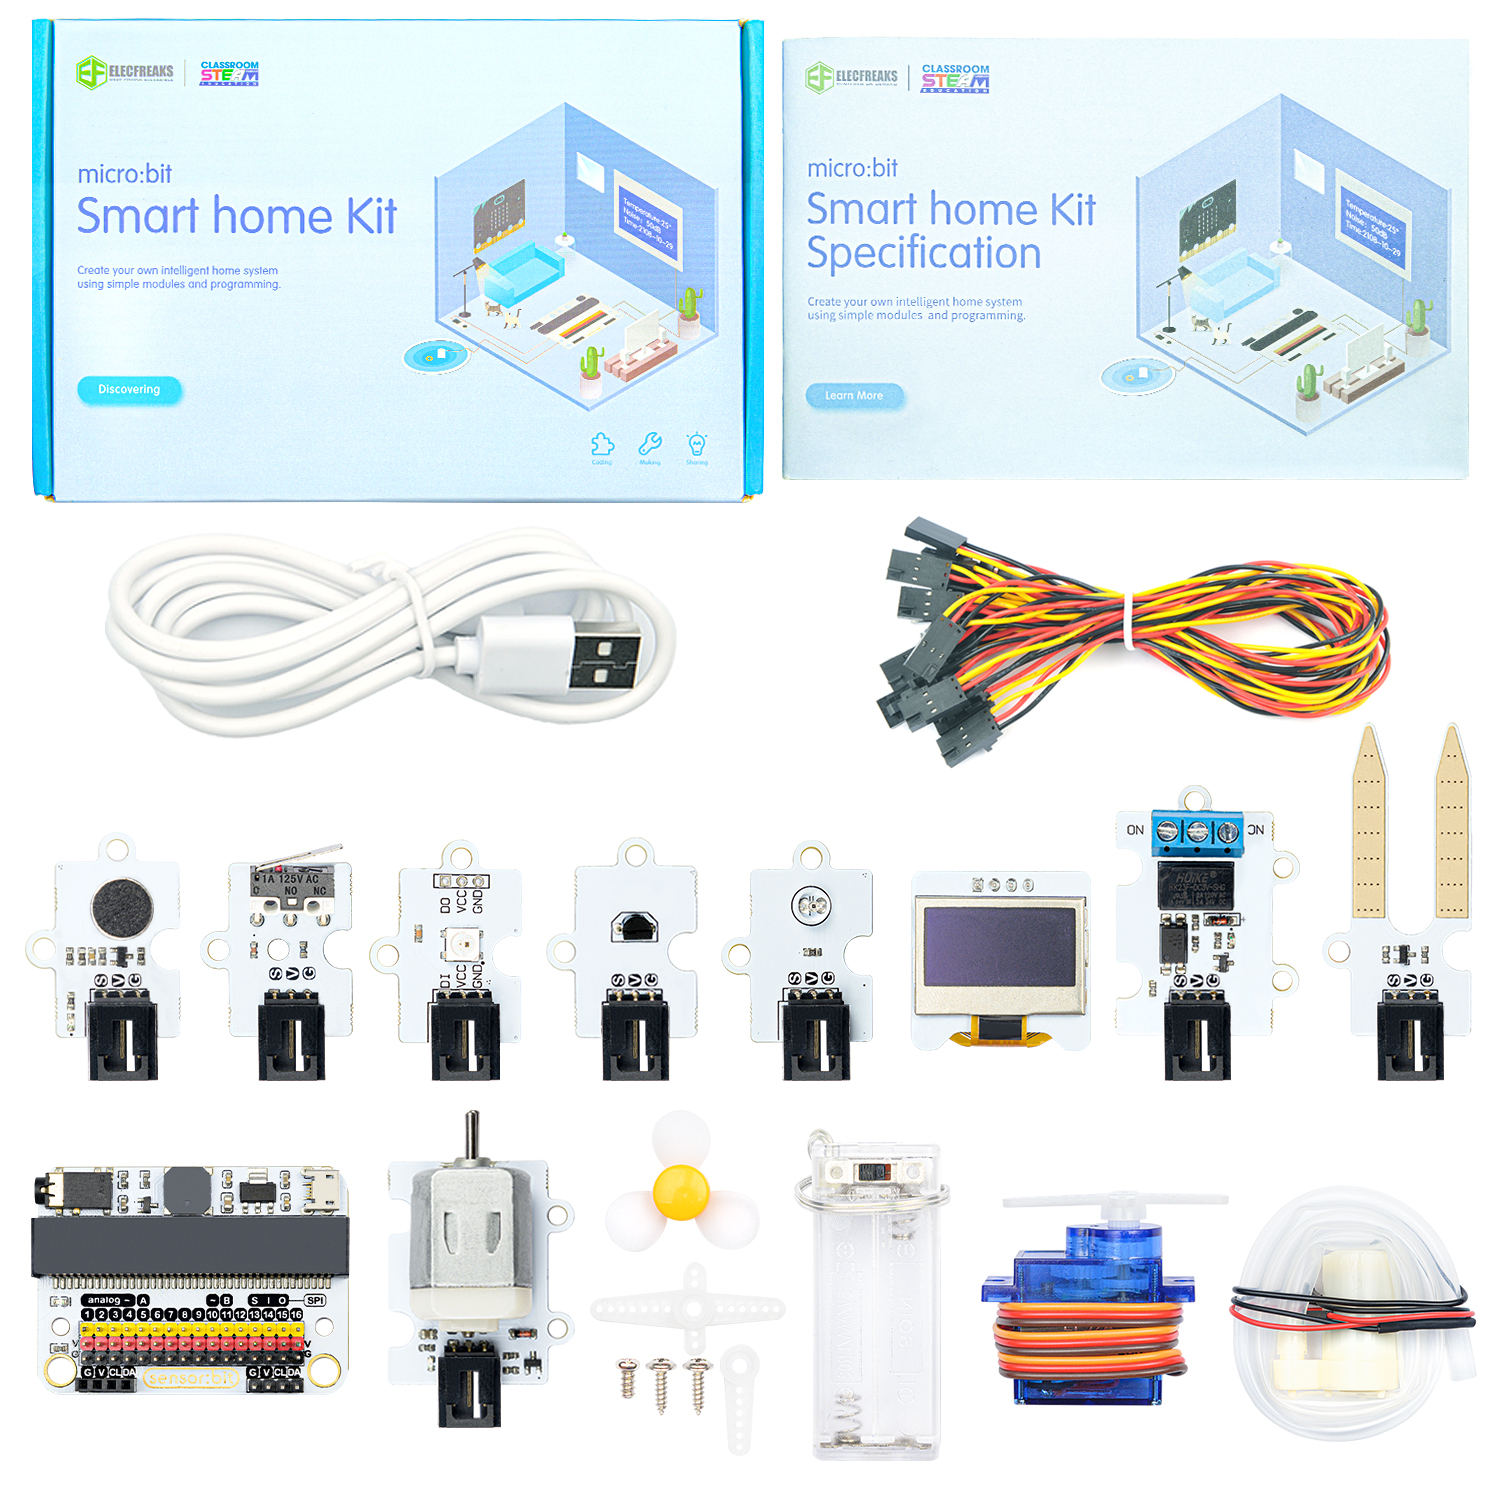 Purchase Modules for Arduino or Arduino starter kit from ELECFREAKS